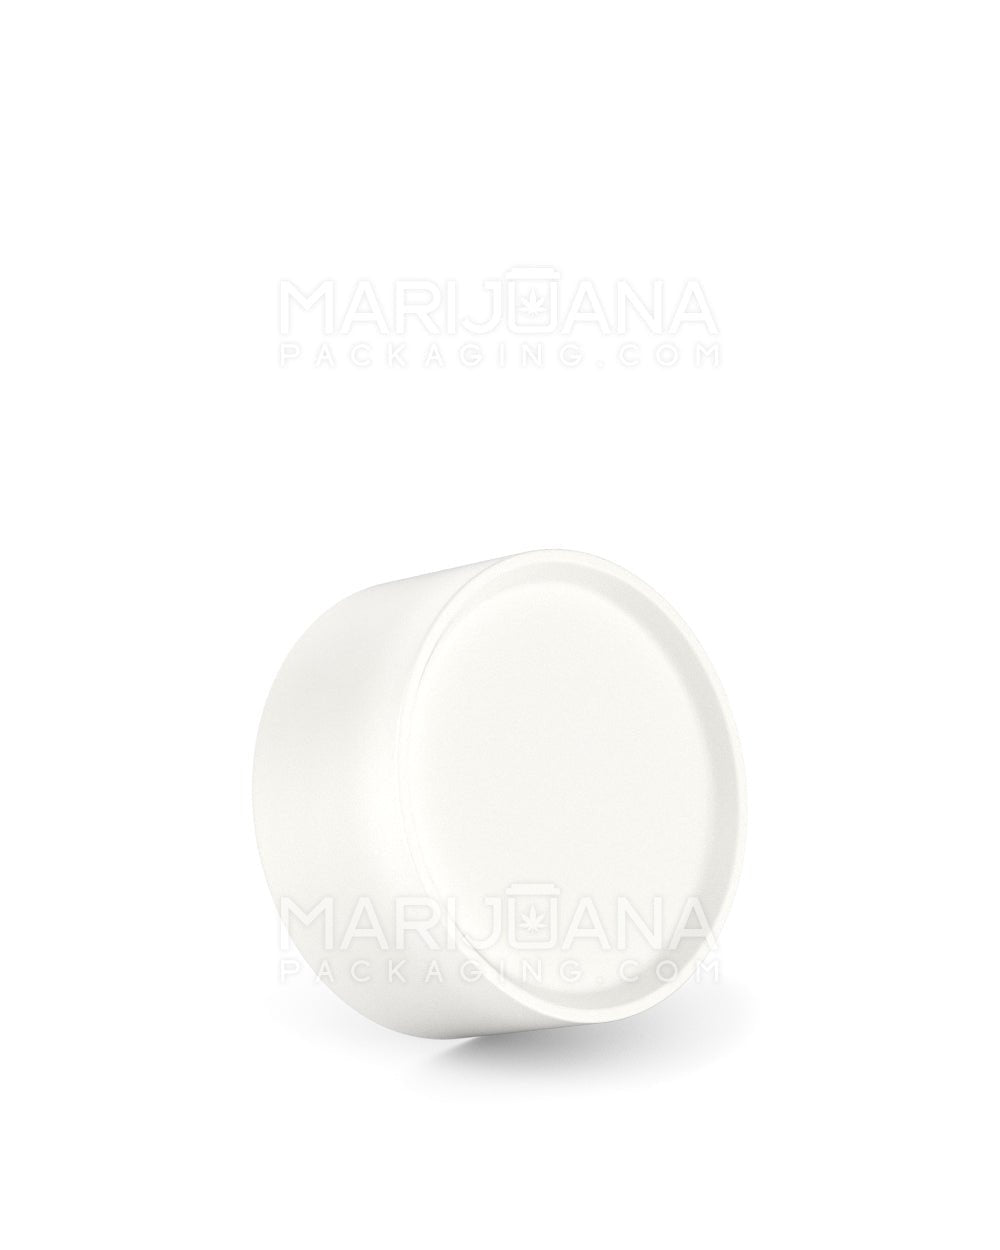 POLLEN GEAR | HiLine Child Resistant Smooth Push Down & Turn Plastic Scooped Caps w/ Foil Liner | 28mm - Matte White - 308 Count - 1